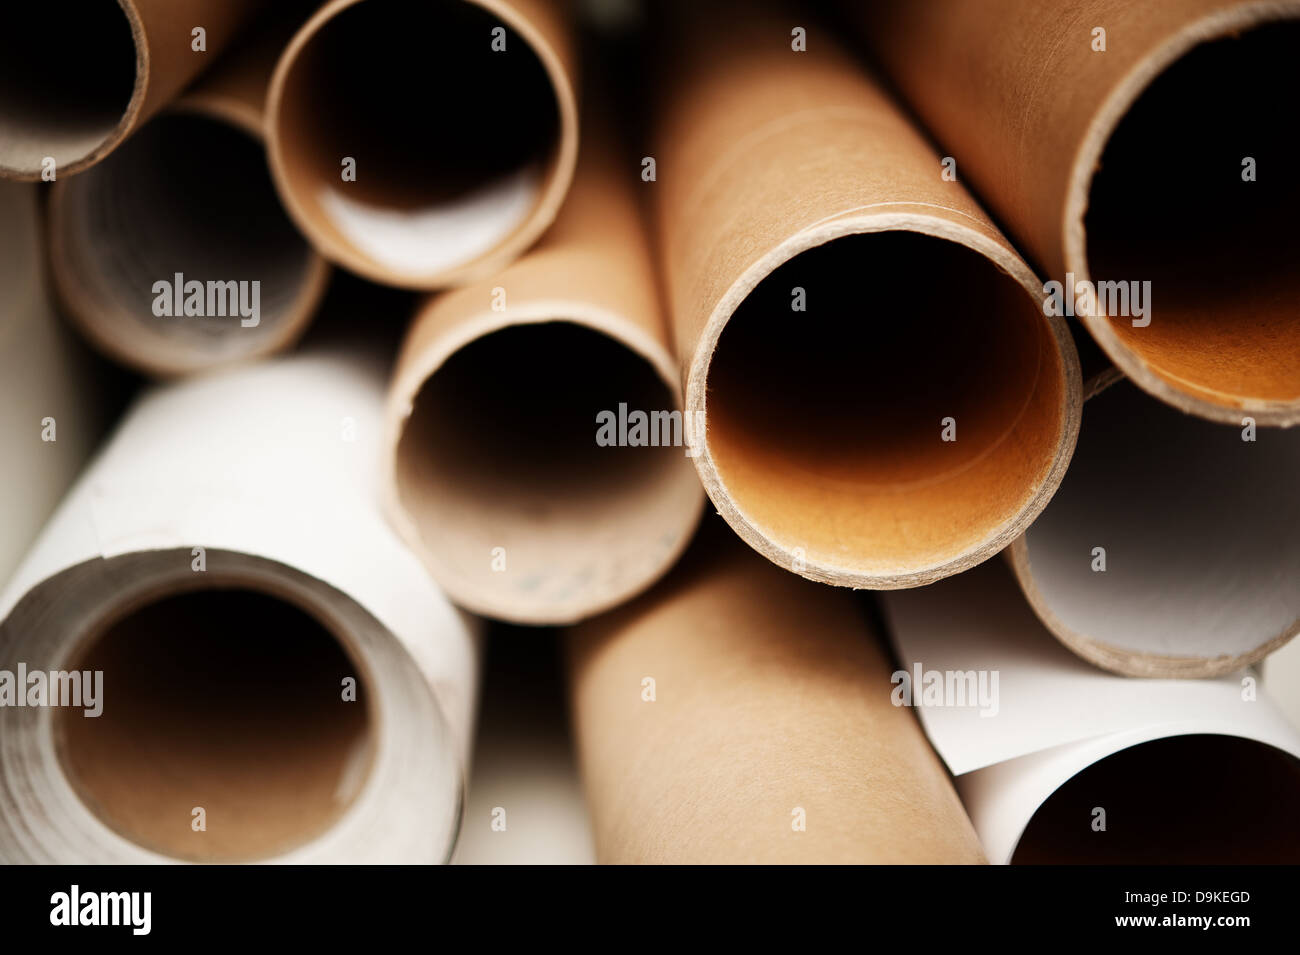 Stack of empty paper rolls Stock Photo